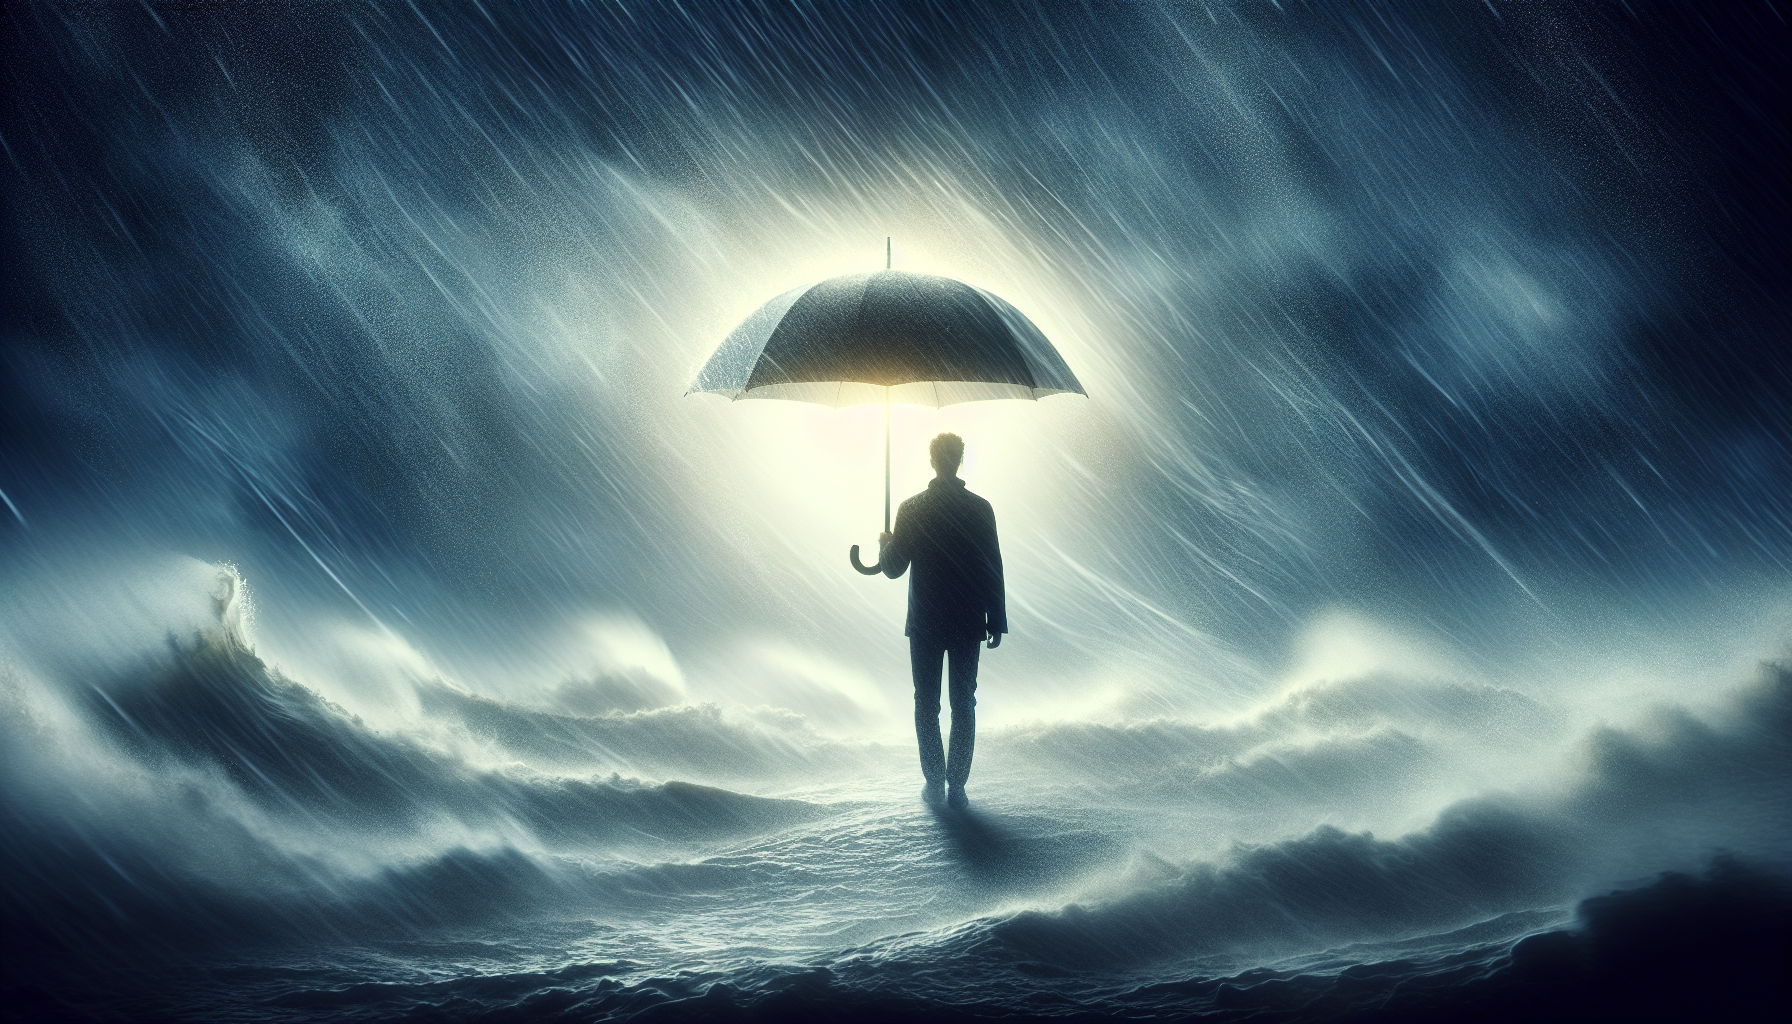 Illustration of a person holding an umbrella in a storm